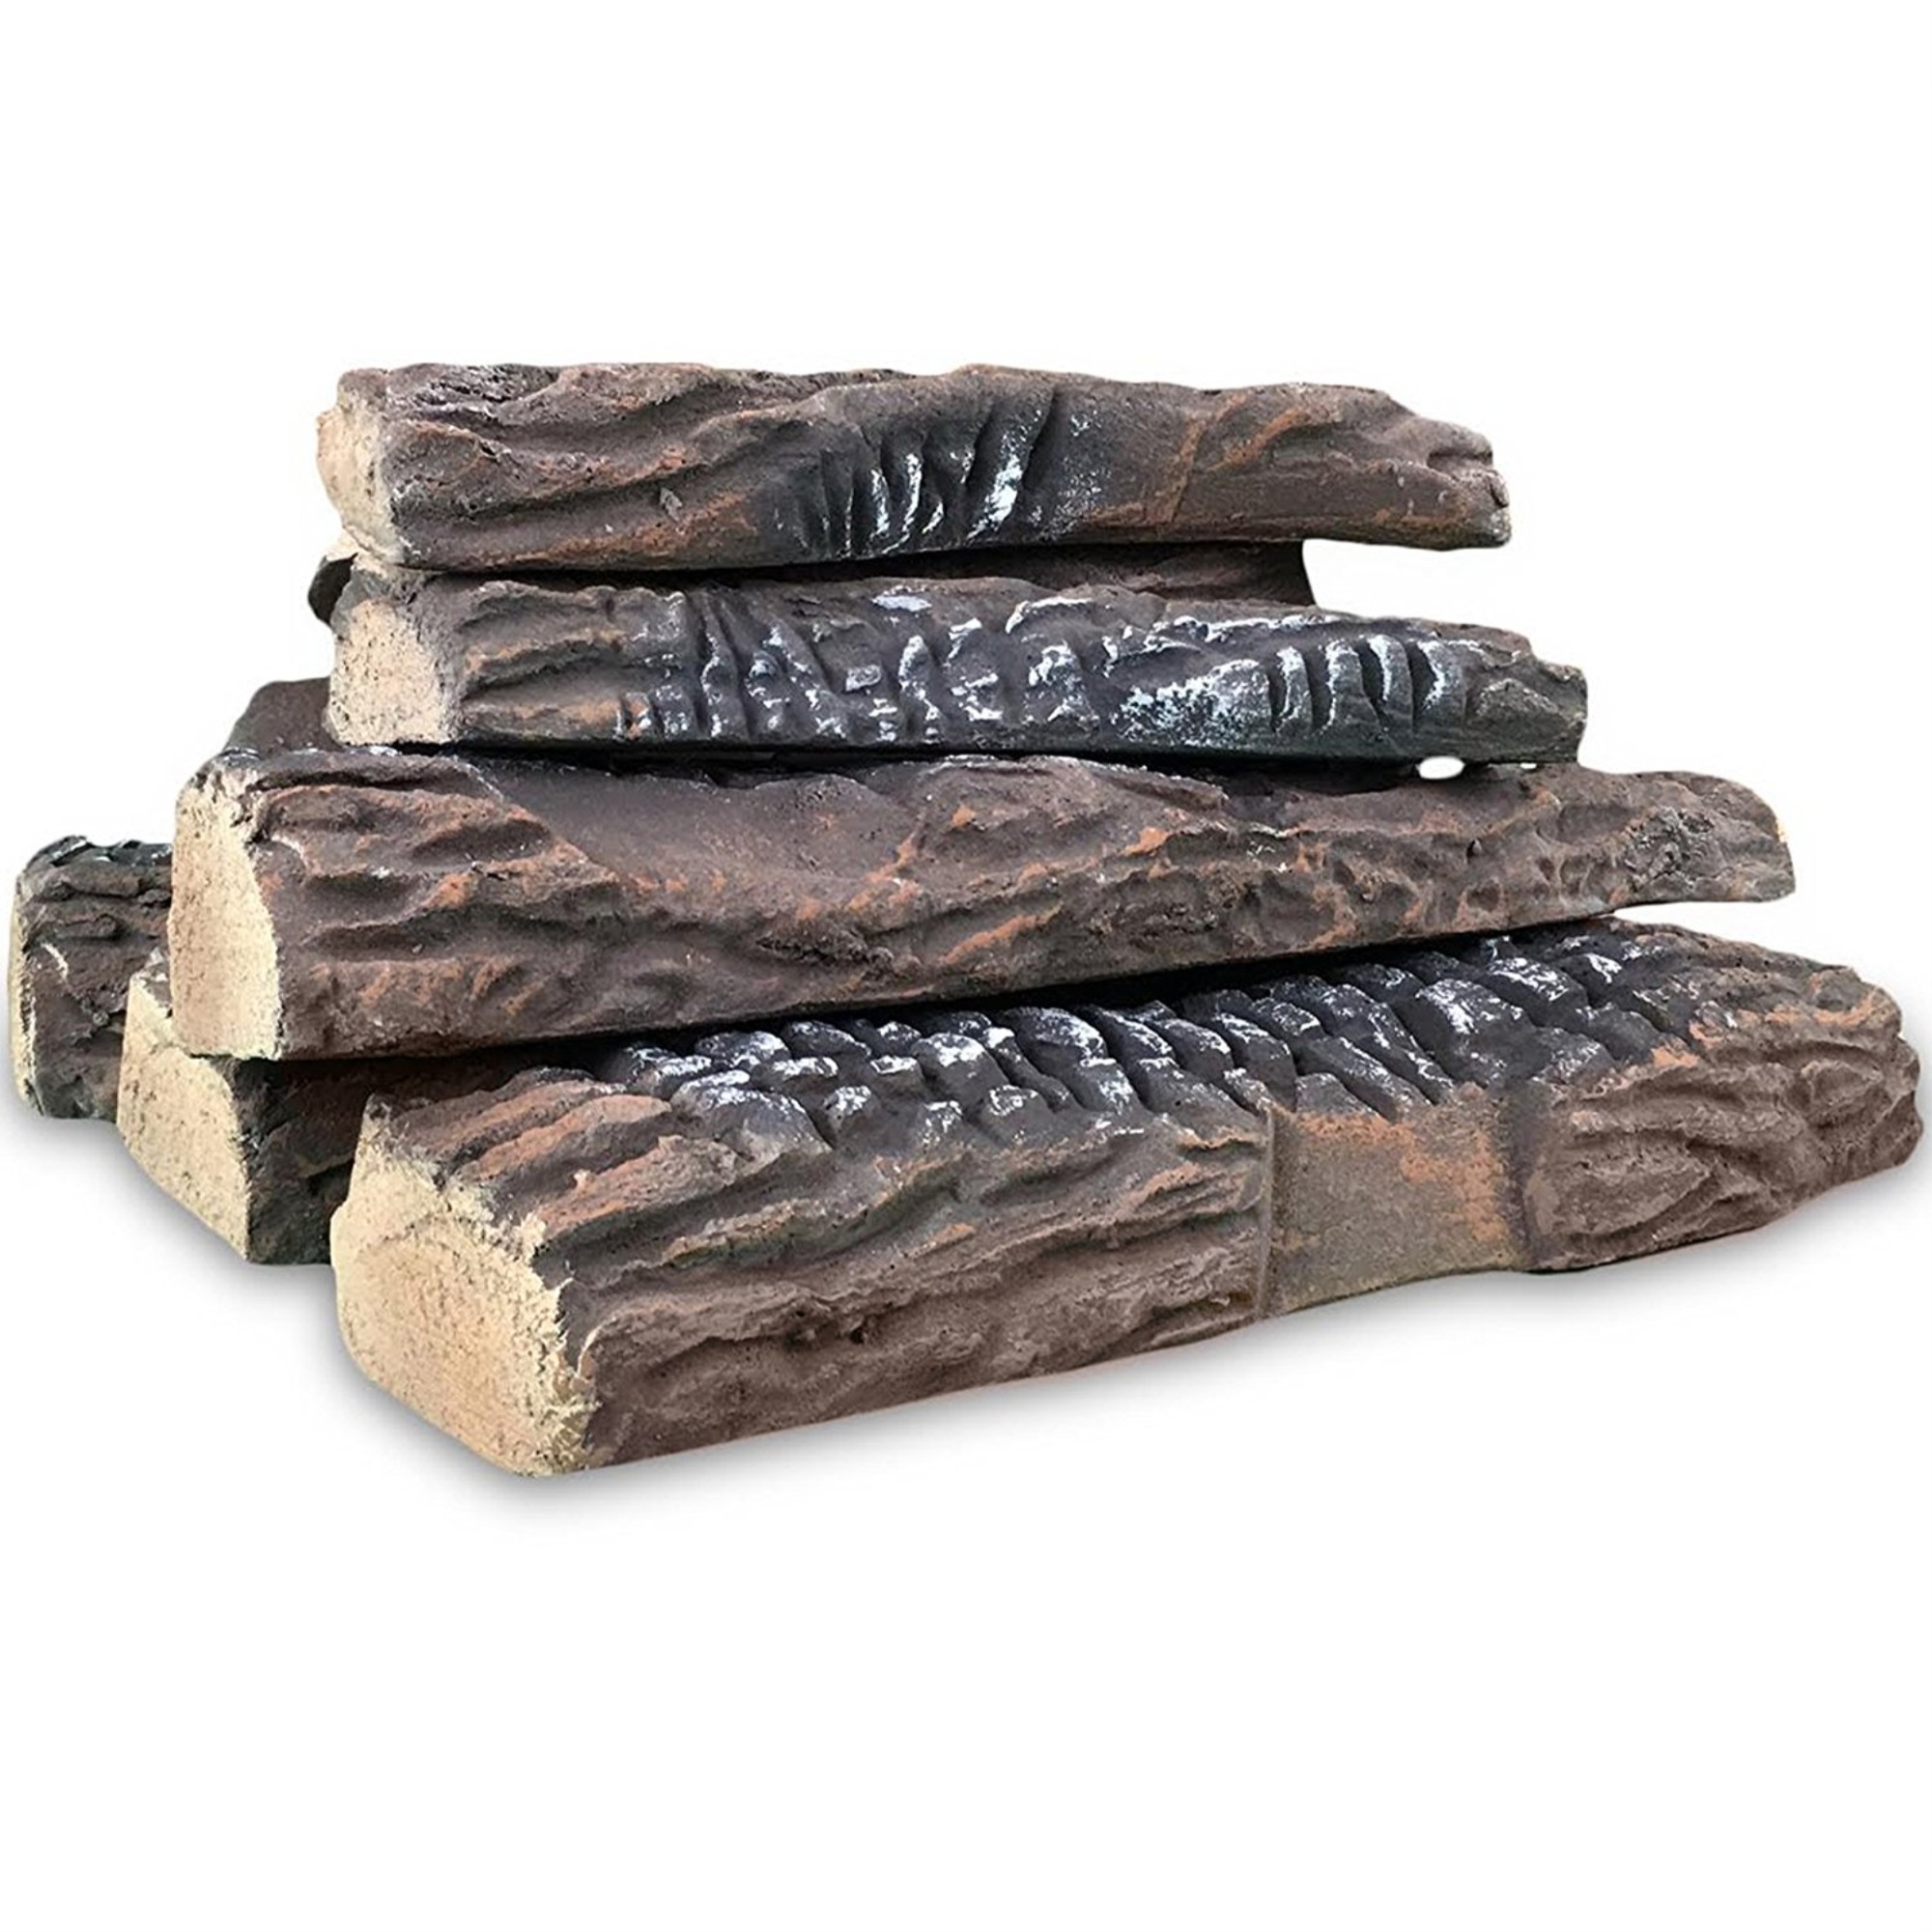 Gas Fireplace Fire Pit Logs, Ceramic Logs For Fire Pit